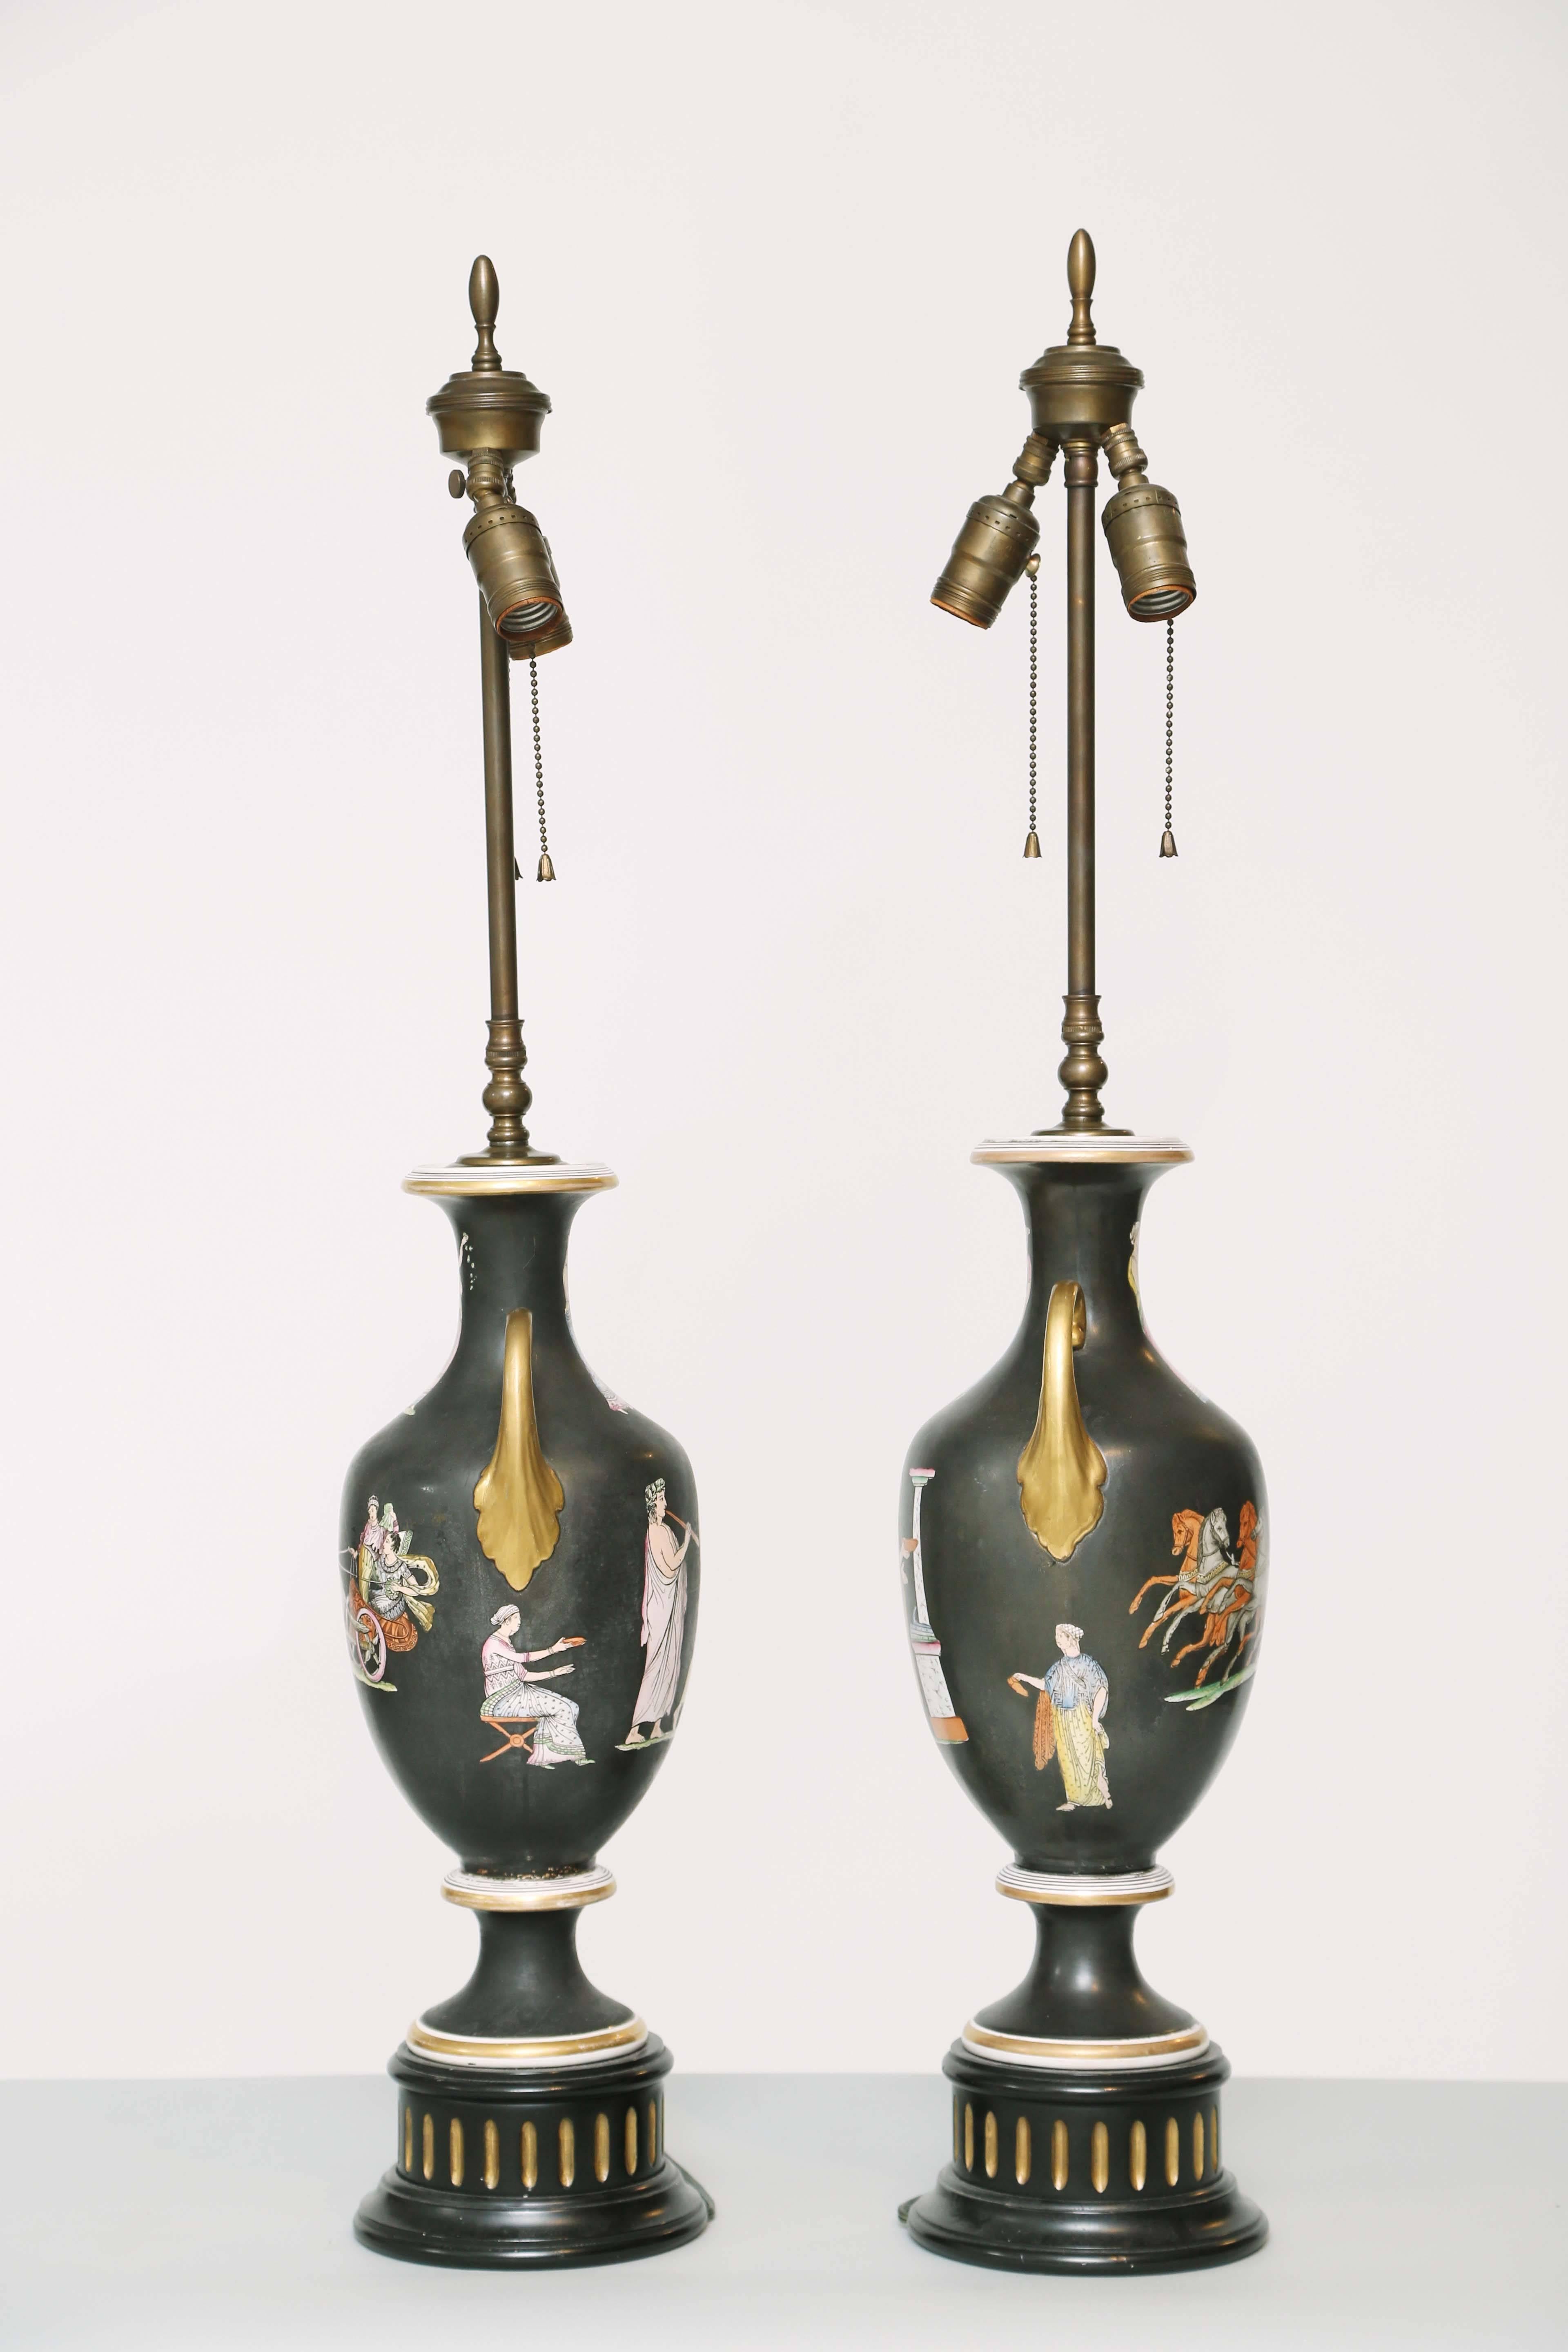 British Pair of Staffordshire Classical Urn-Form Lamps For Sale